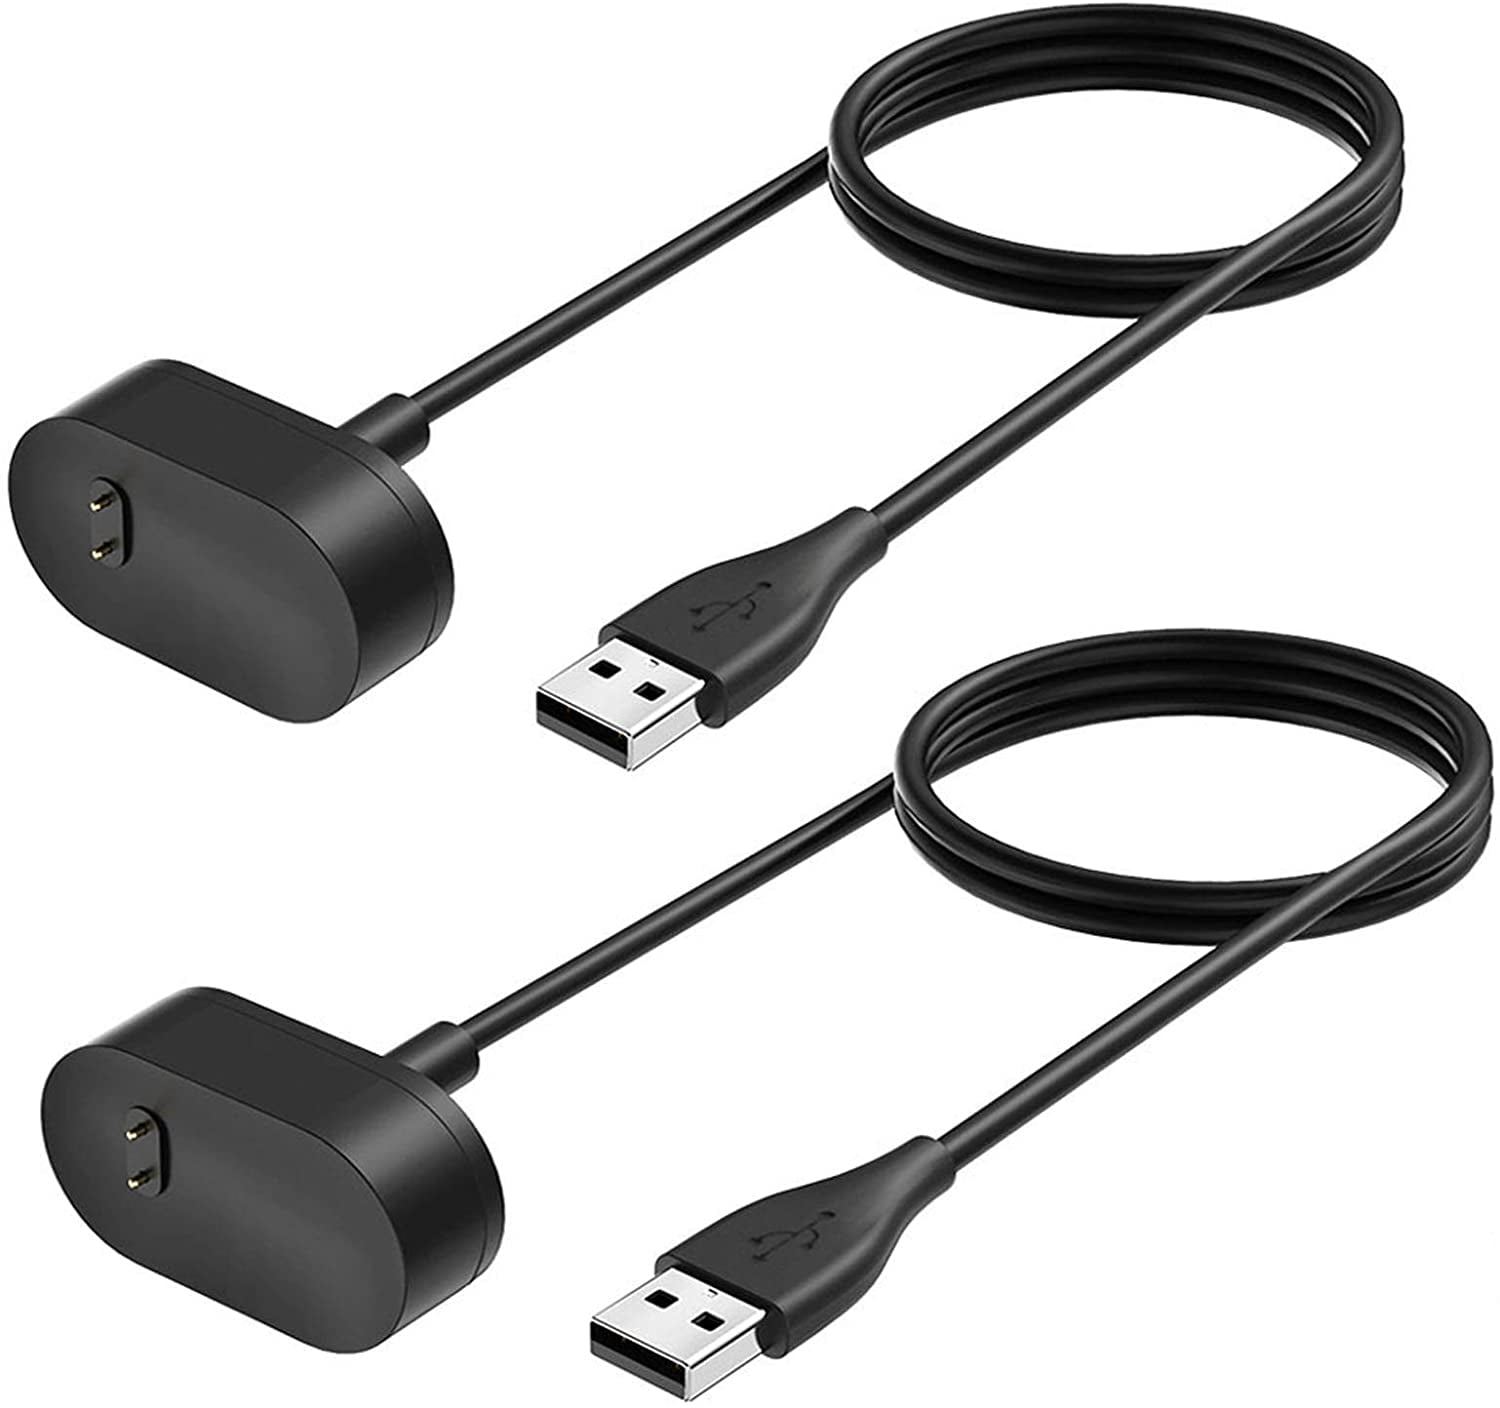 FYOUNG Replacement for Fitbit Inspire and Fitbit Inspire HR Charger 2 Pack x 3.3ft Charging Cable Cord Dock for Inspire/Inspire HR Health & Fitness Tracker